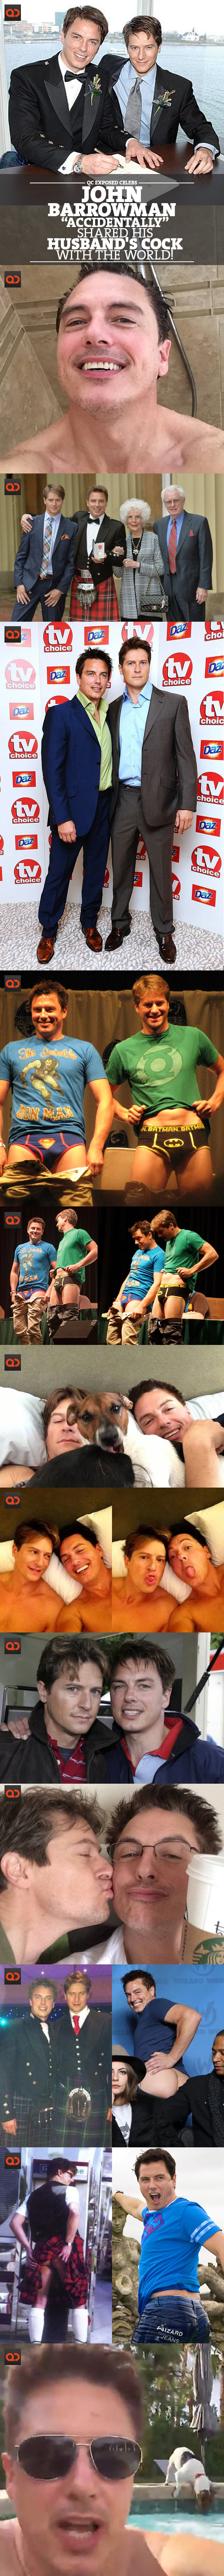 qc-john_barrowman_accidentally_shared_his_husbands_cock-collage01